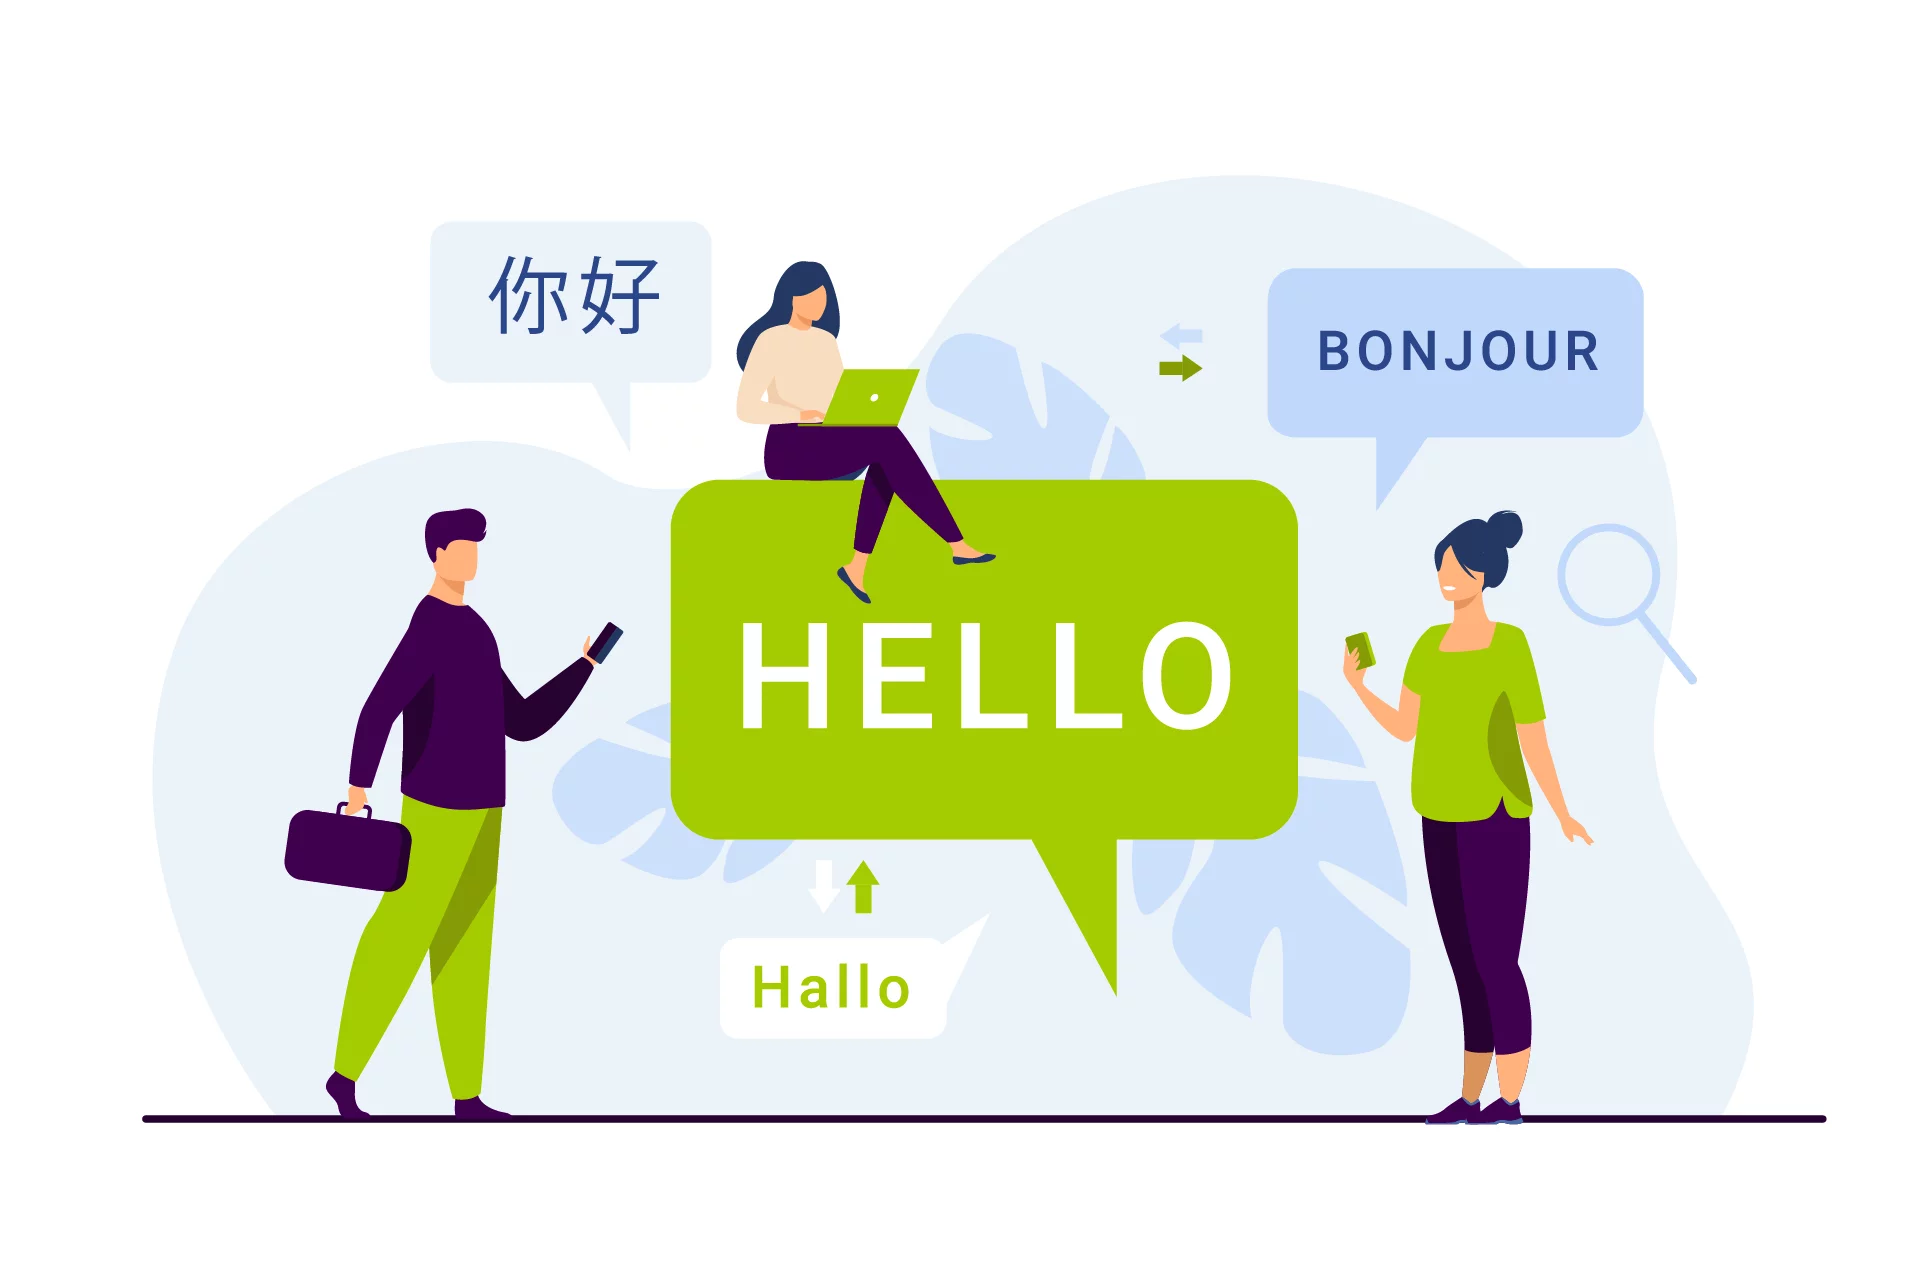 Multilingual Support